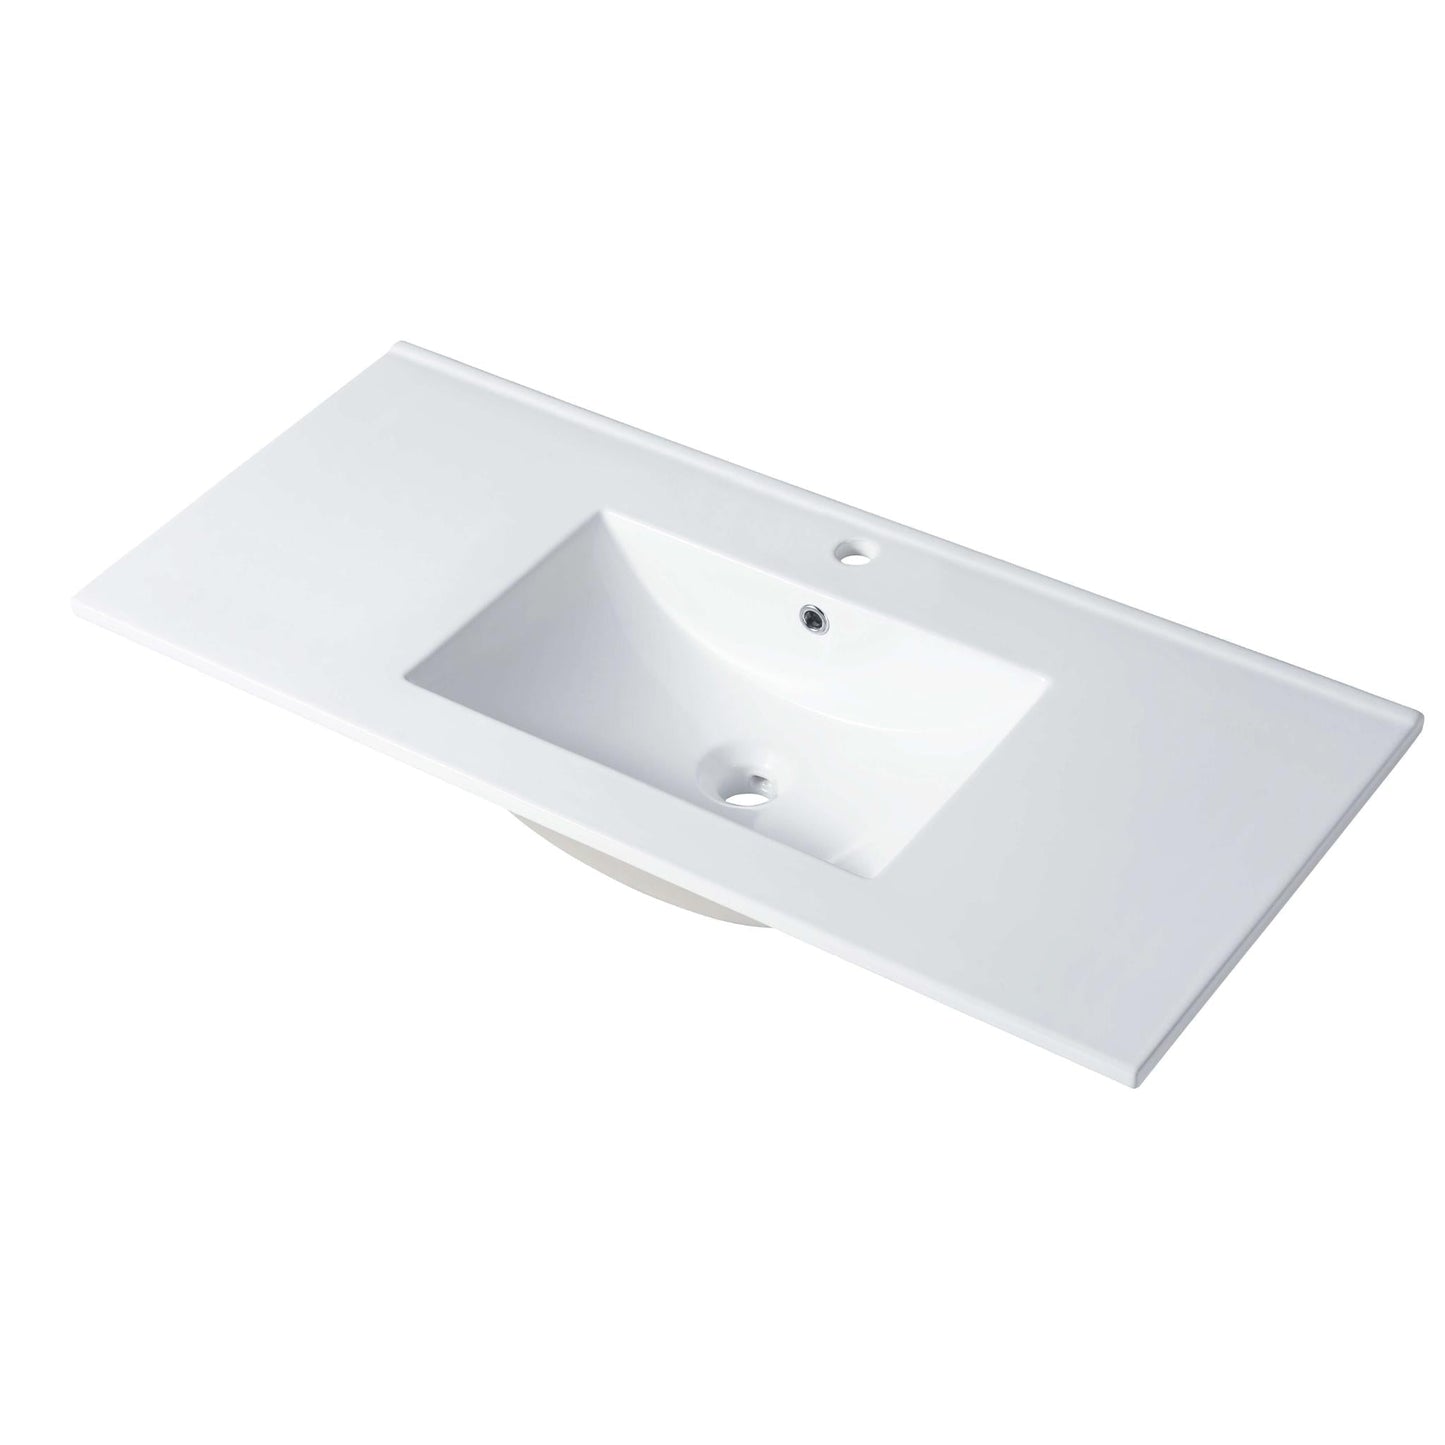 Blossom Sydney 48" x 18" White Rectangular Ceramic Vanity Top With Integrated Single Sink And Overflow